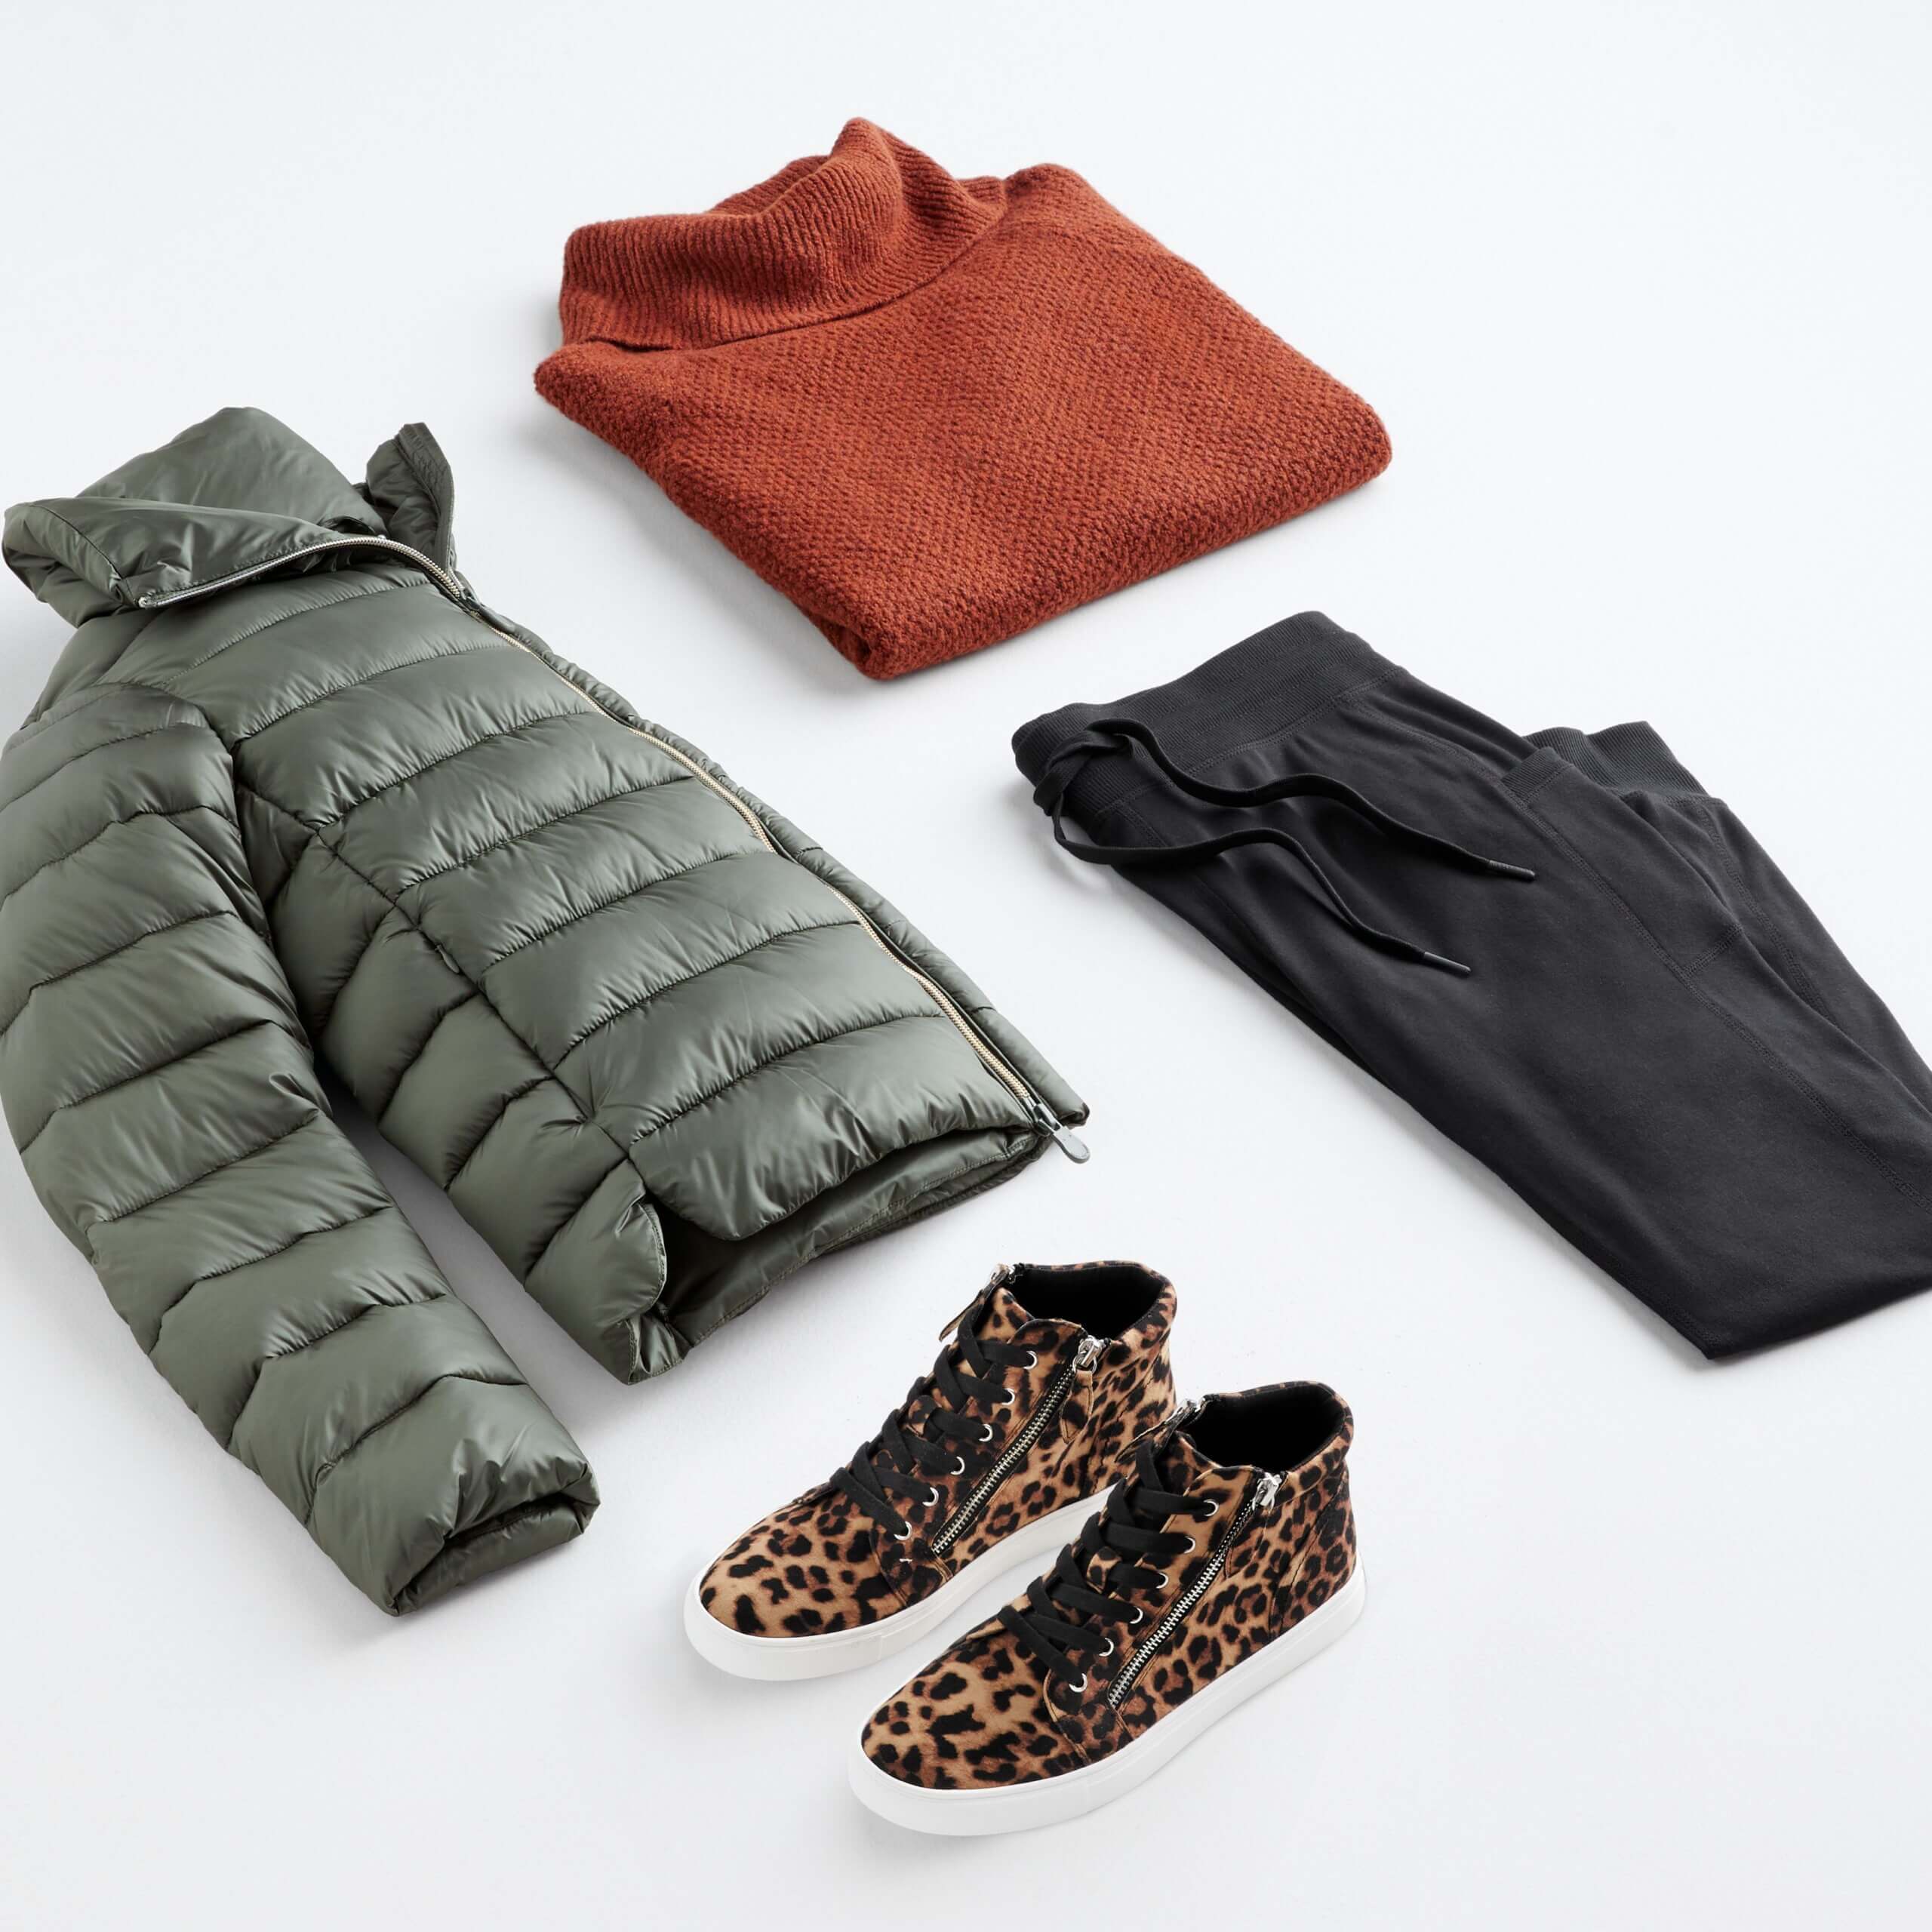 Stitch Fix Women's outfit laydown featuring green puffer jacket, burnt orange turtleneck pullover sweater, black jogger pants and cheetah-print high top sneakers. 